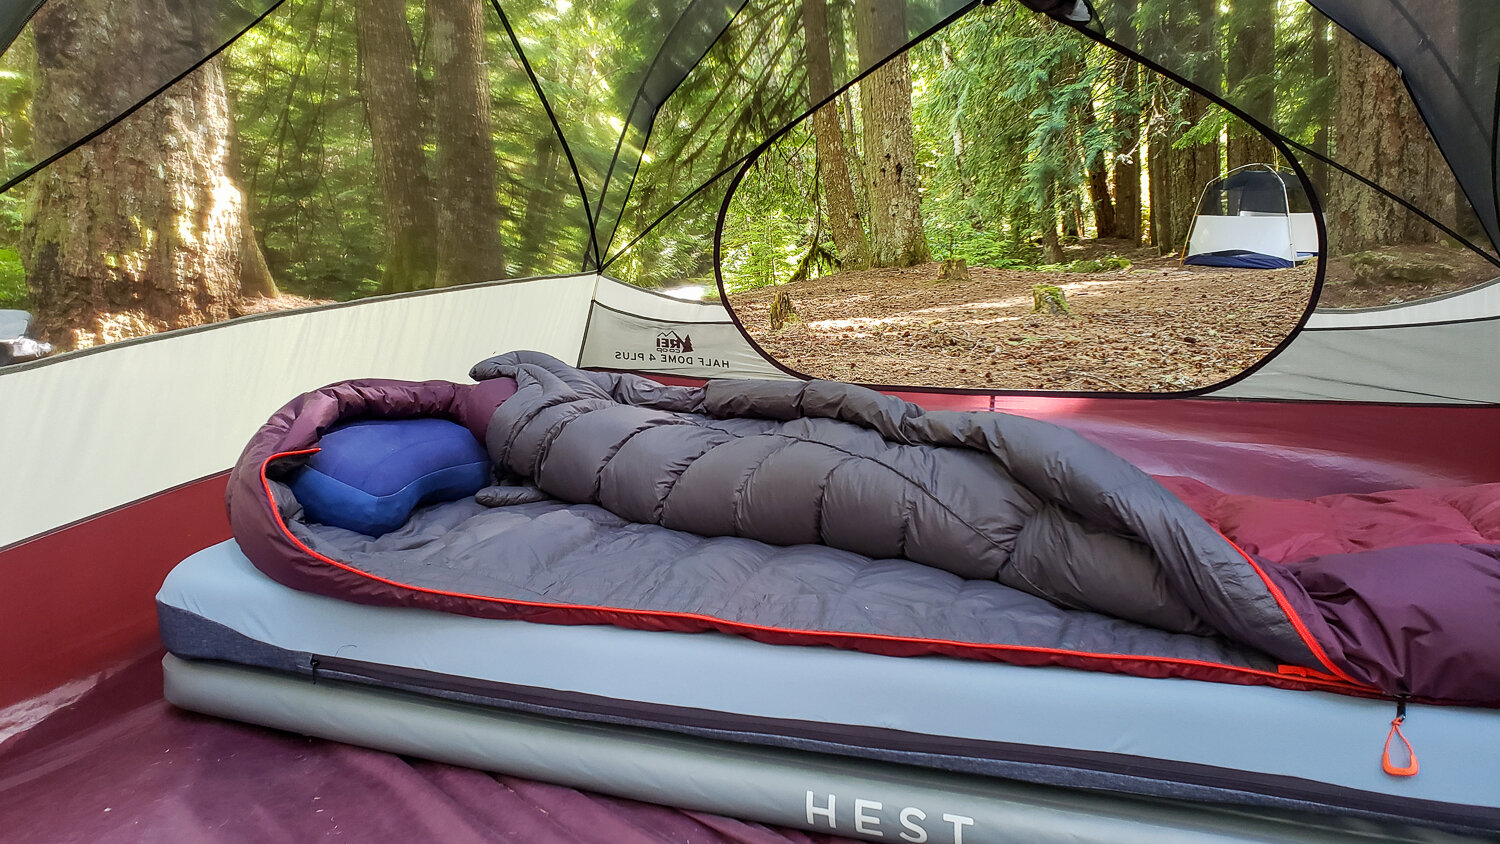 The HEST Sleep System Sleeping Pad is one of the most luxurious camping mattresses we’ve ever used.